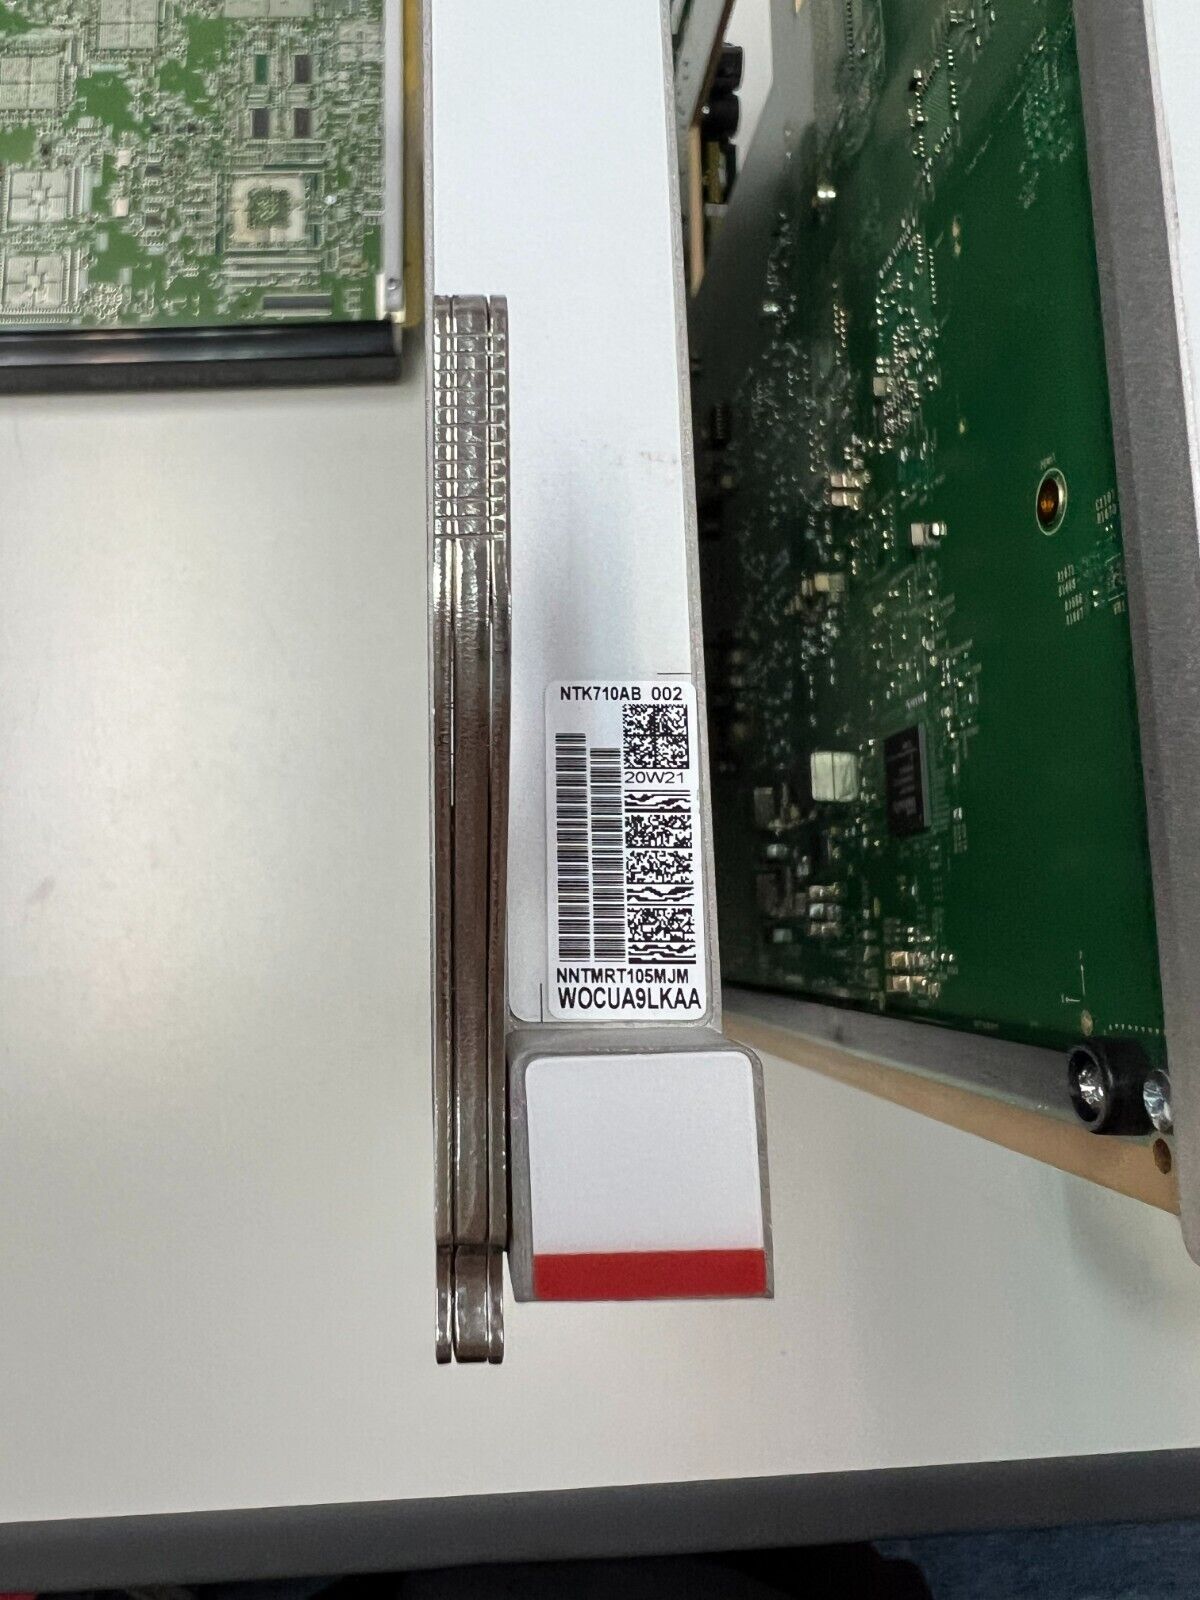 CIENA NTK710AB CTM (CONTROL AND TIMING MODULE)